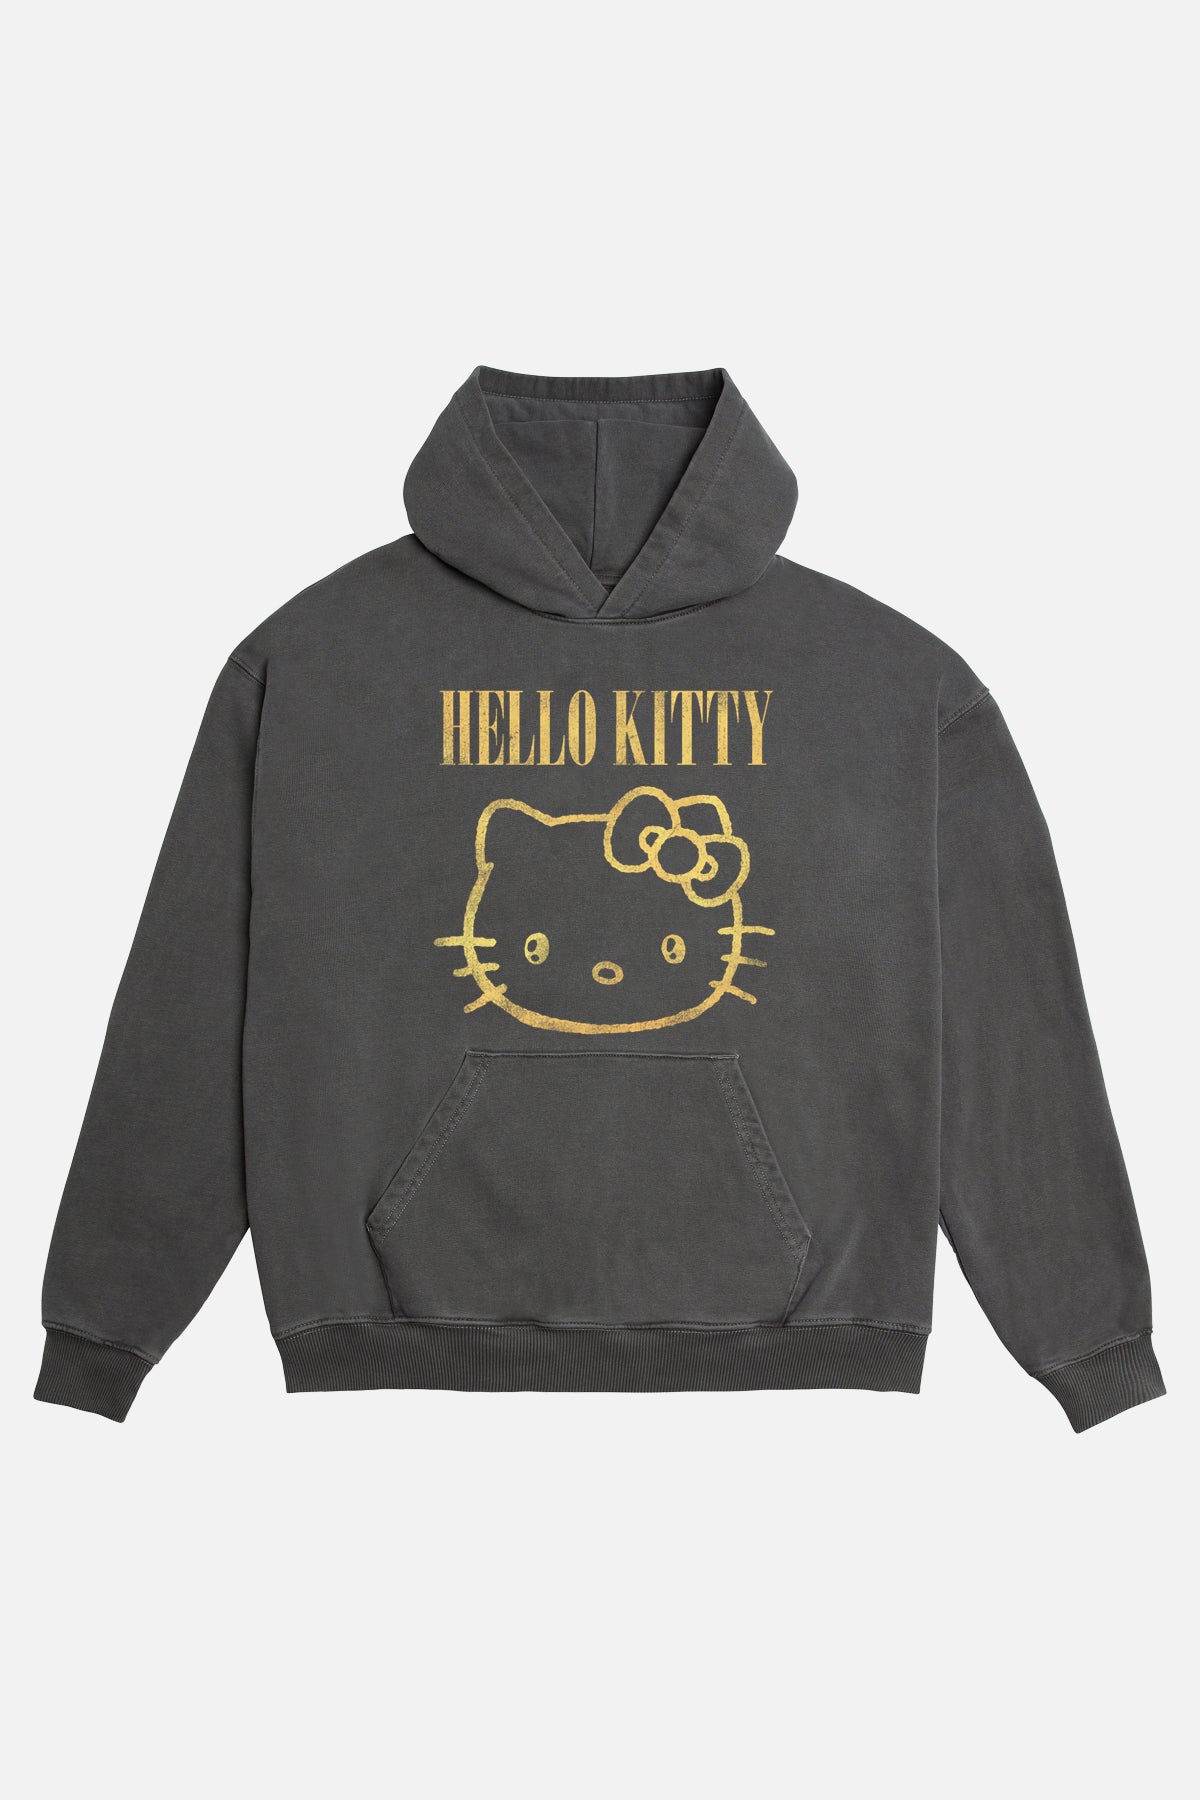 Hello Kitty Purrfect Rebels Hoodie in Washed Grey